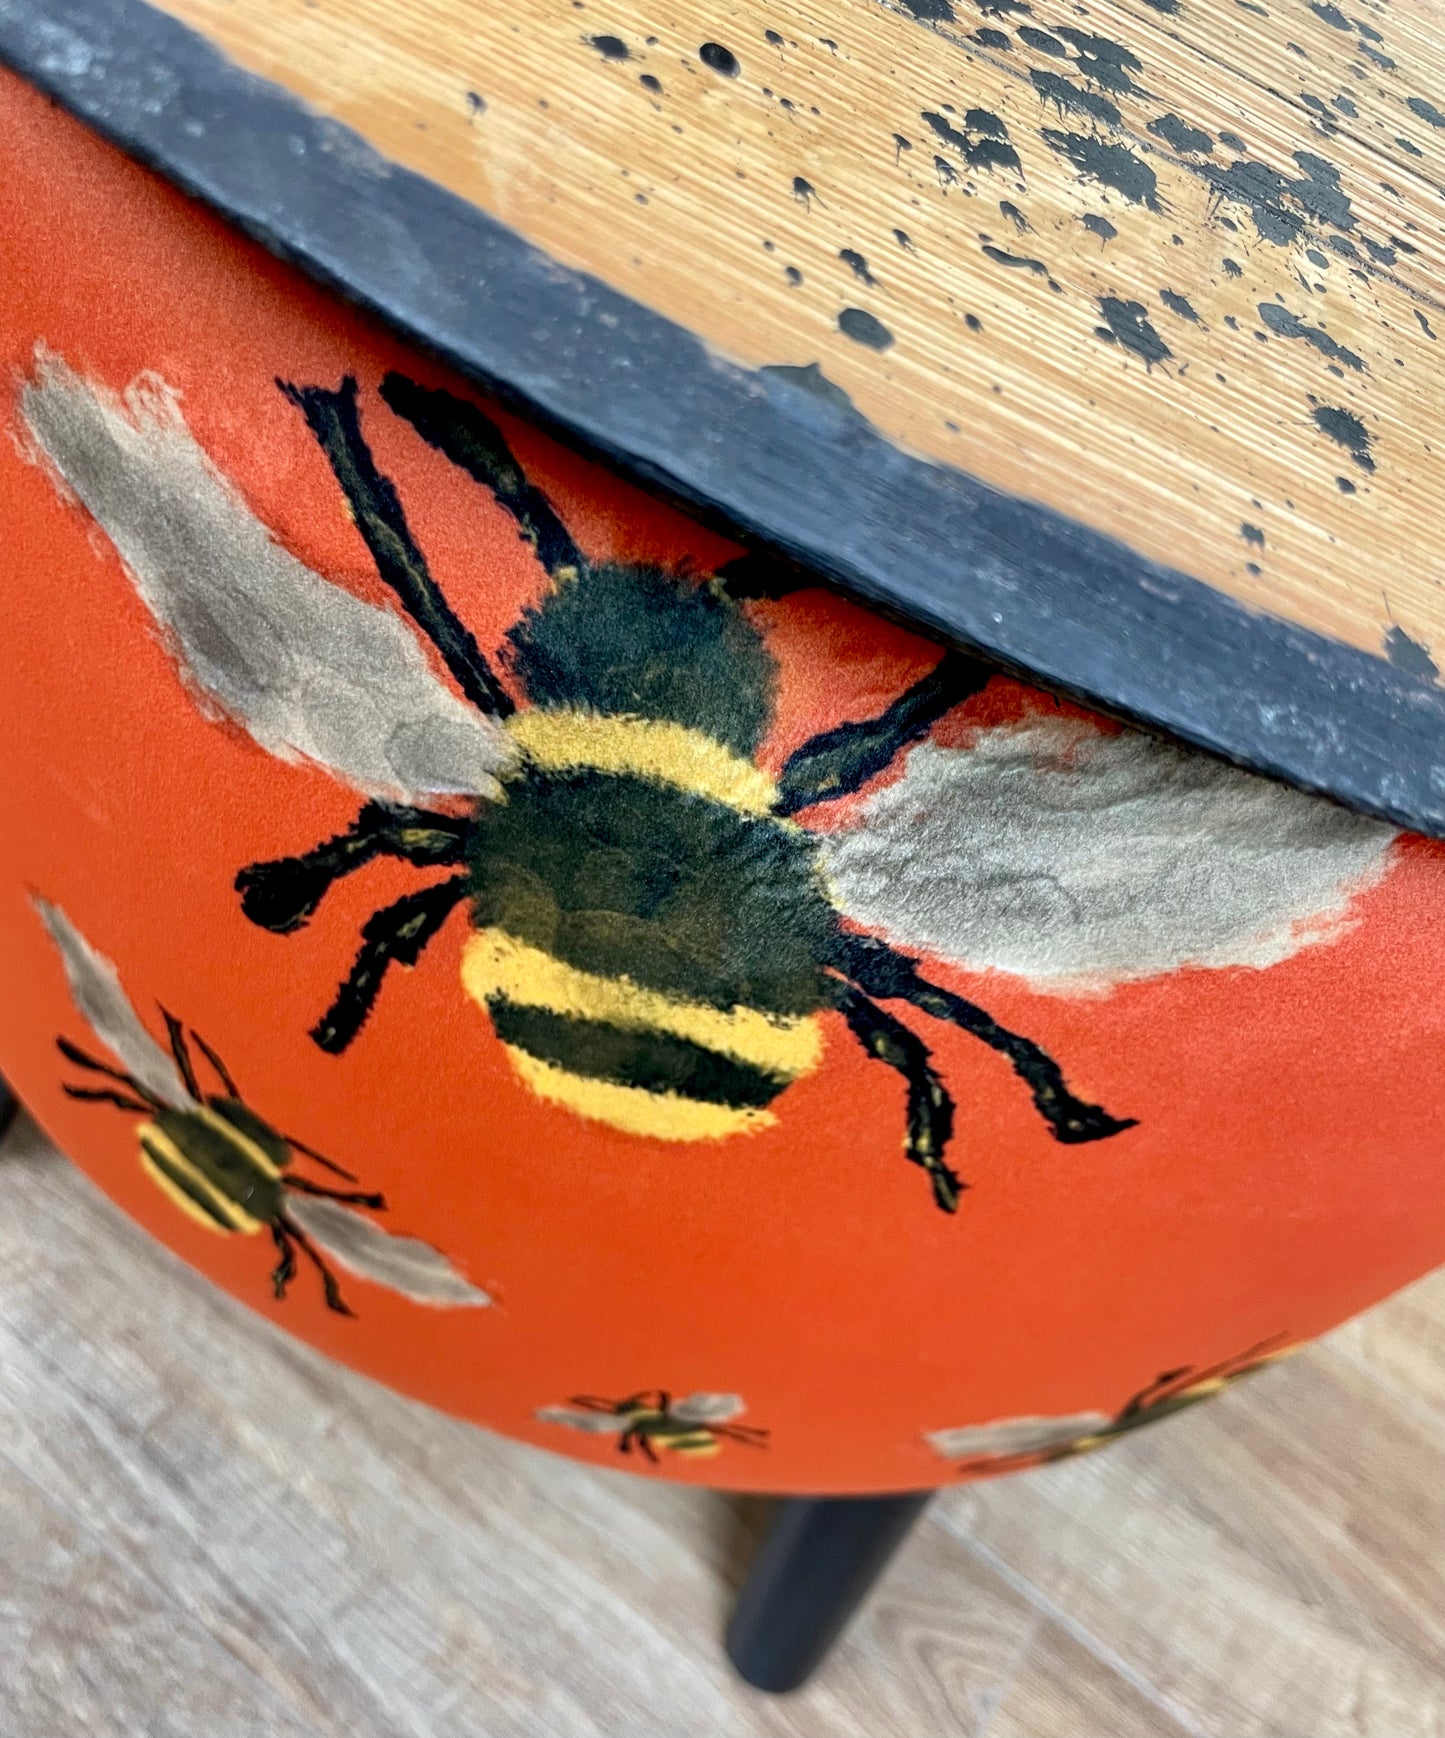 Buzzy Bee Velvet and Oak Whisky Barrel Top ‘Wee Dram’ Table